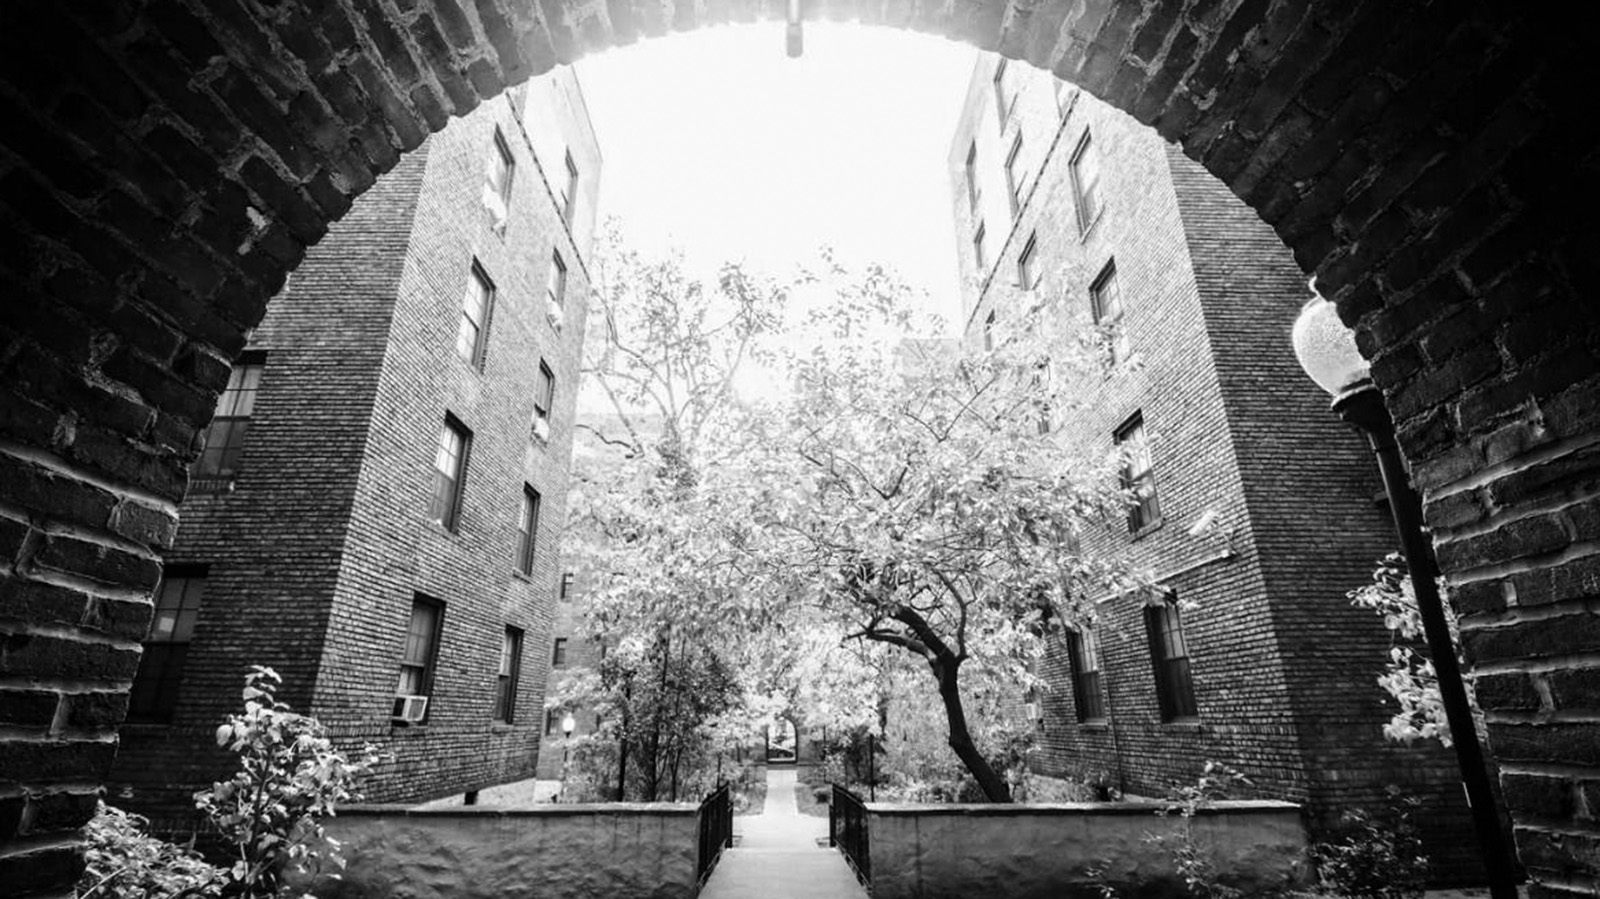 A black-and-white photo taken from inside a brick archway entrance that looks out into a small courtyard surrounded on either side by brick apartment buildings.